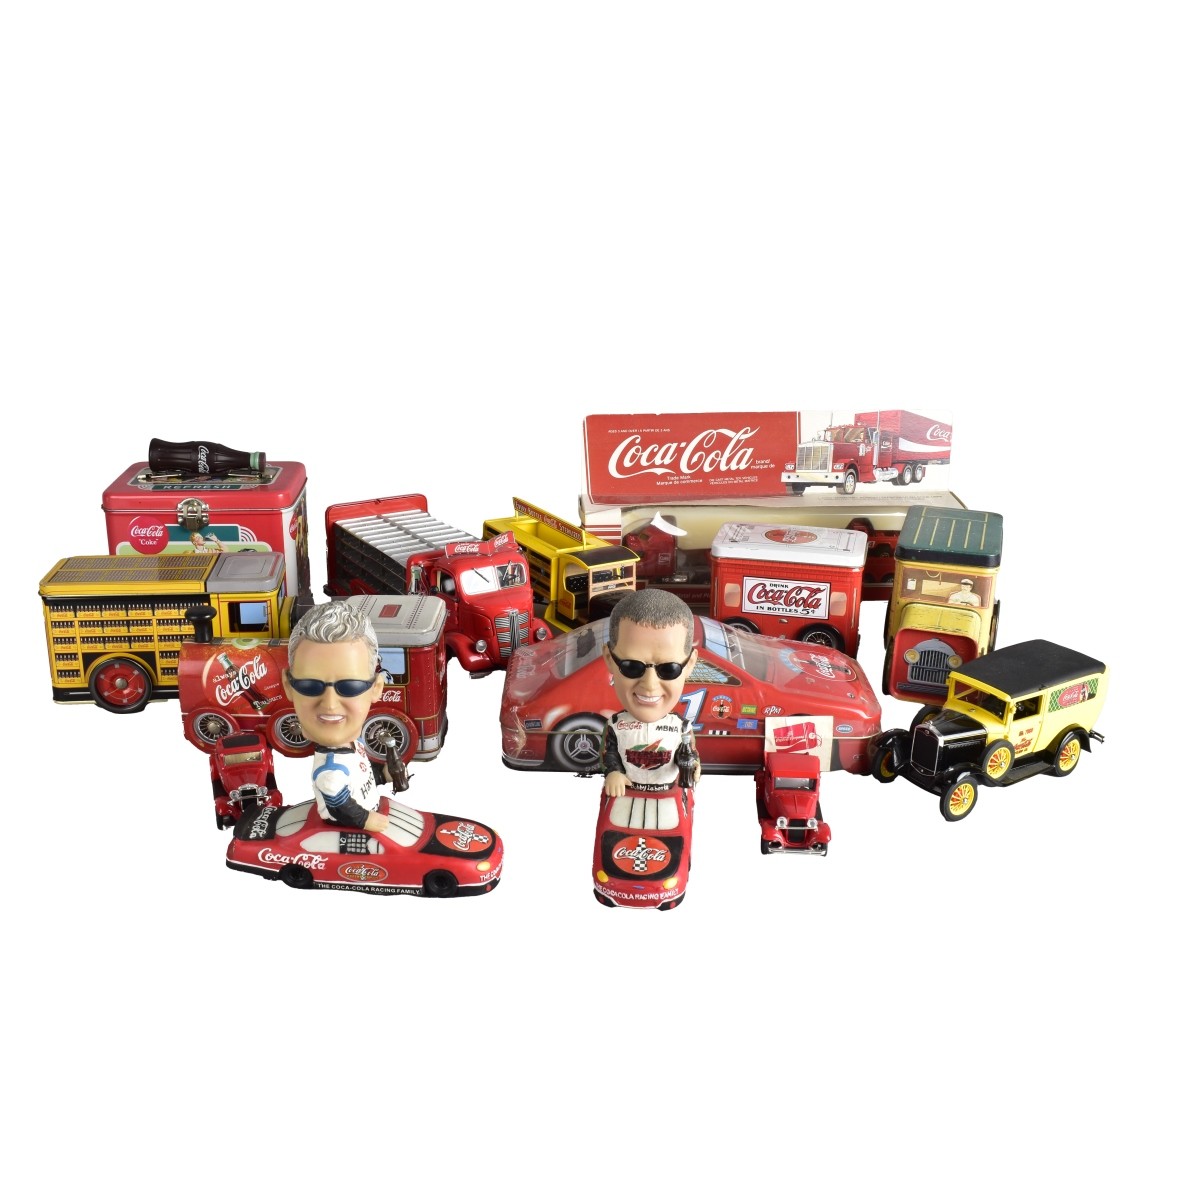 Coca Cola Collection Trucks and Cars